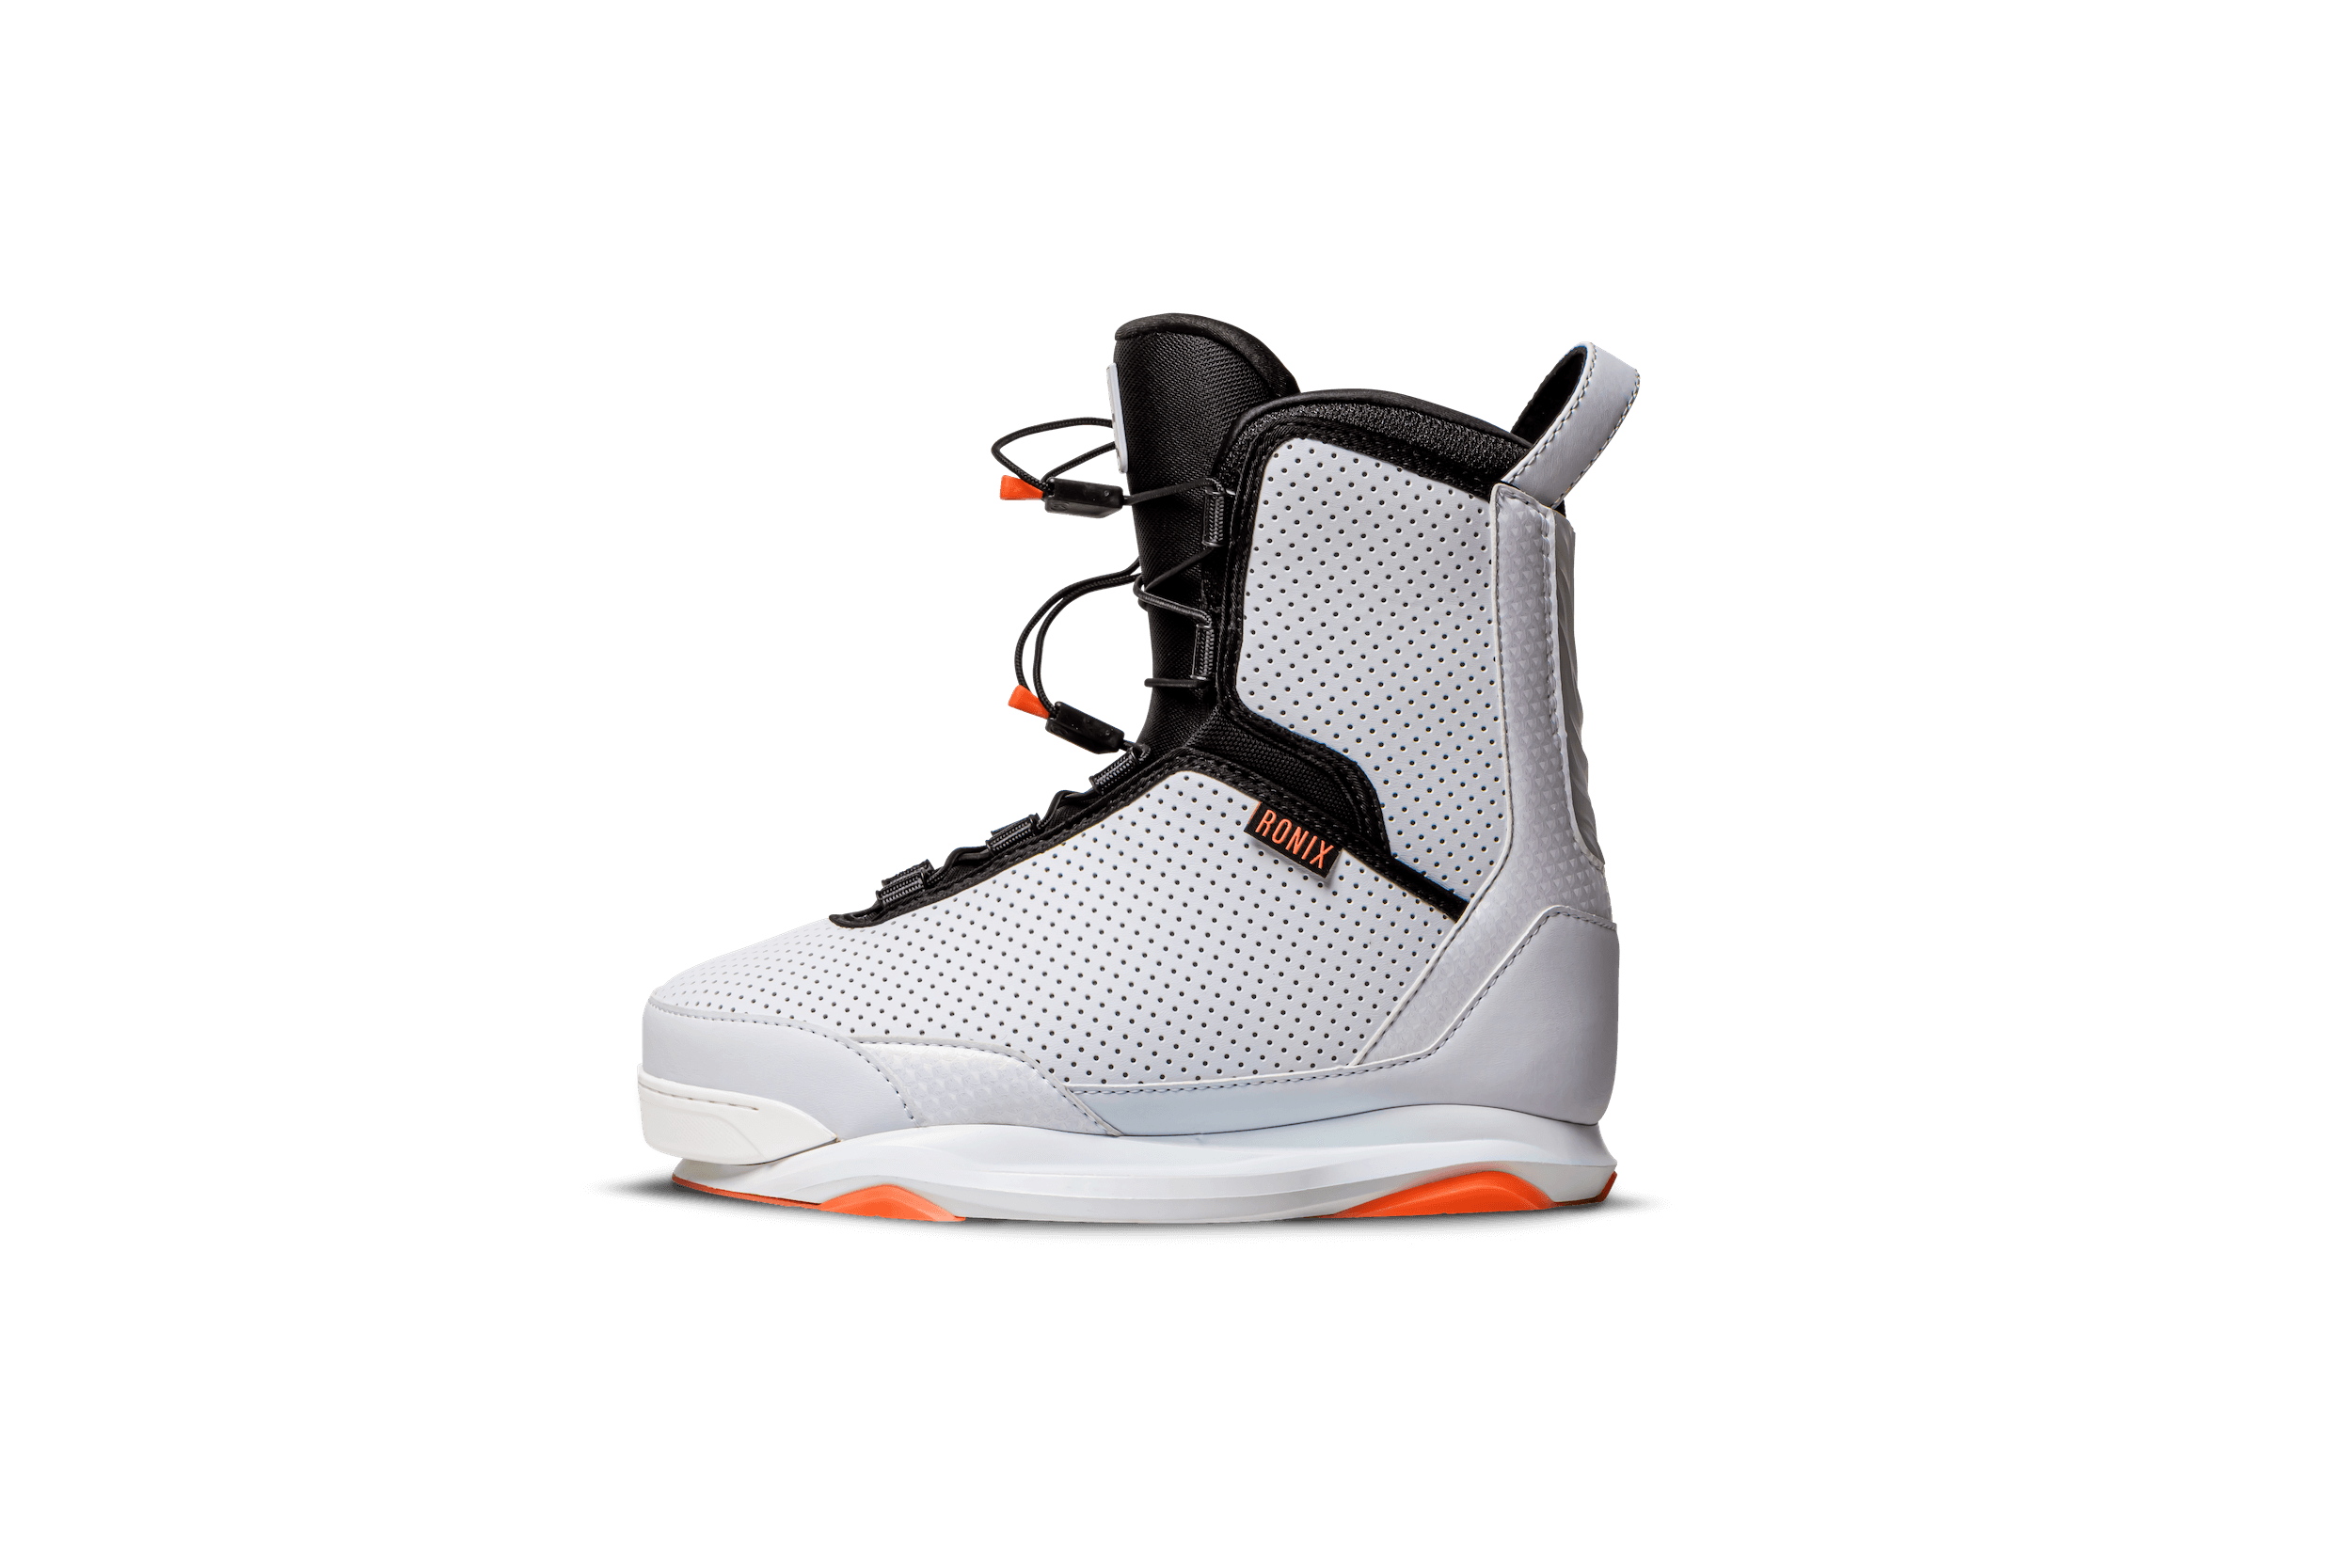 A white and orange Ronix 2023 Women's Rise Bindings ski boot from the women's line on a black background.